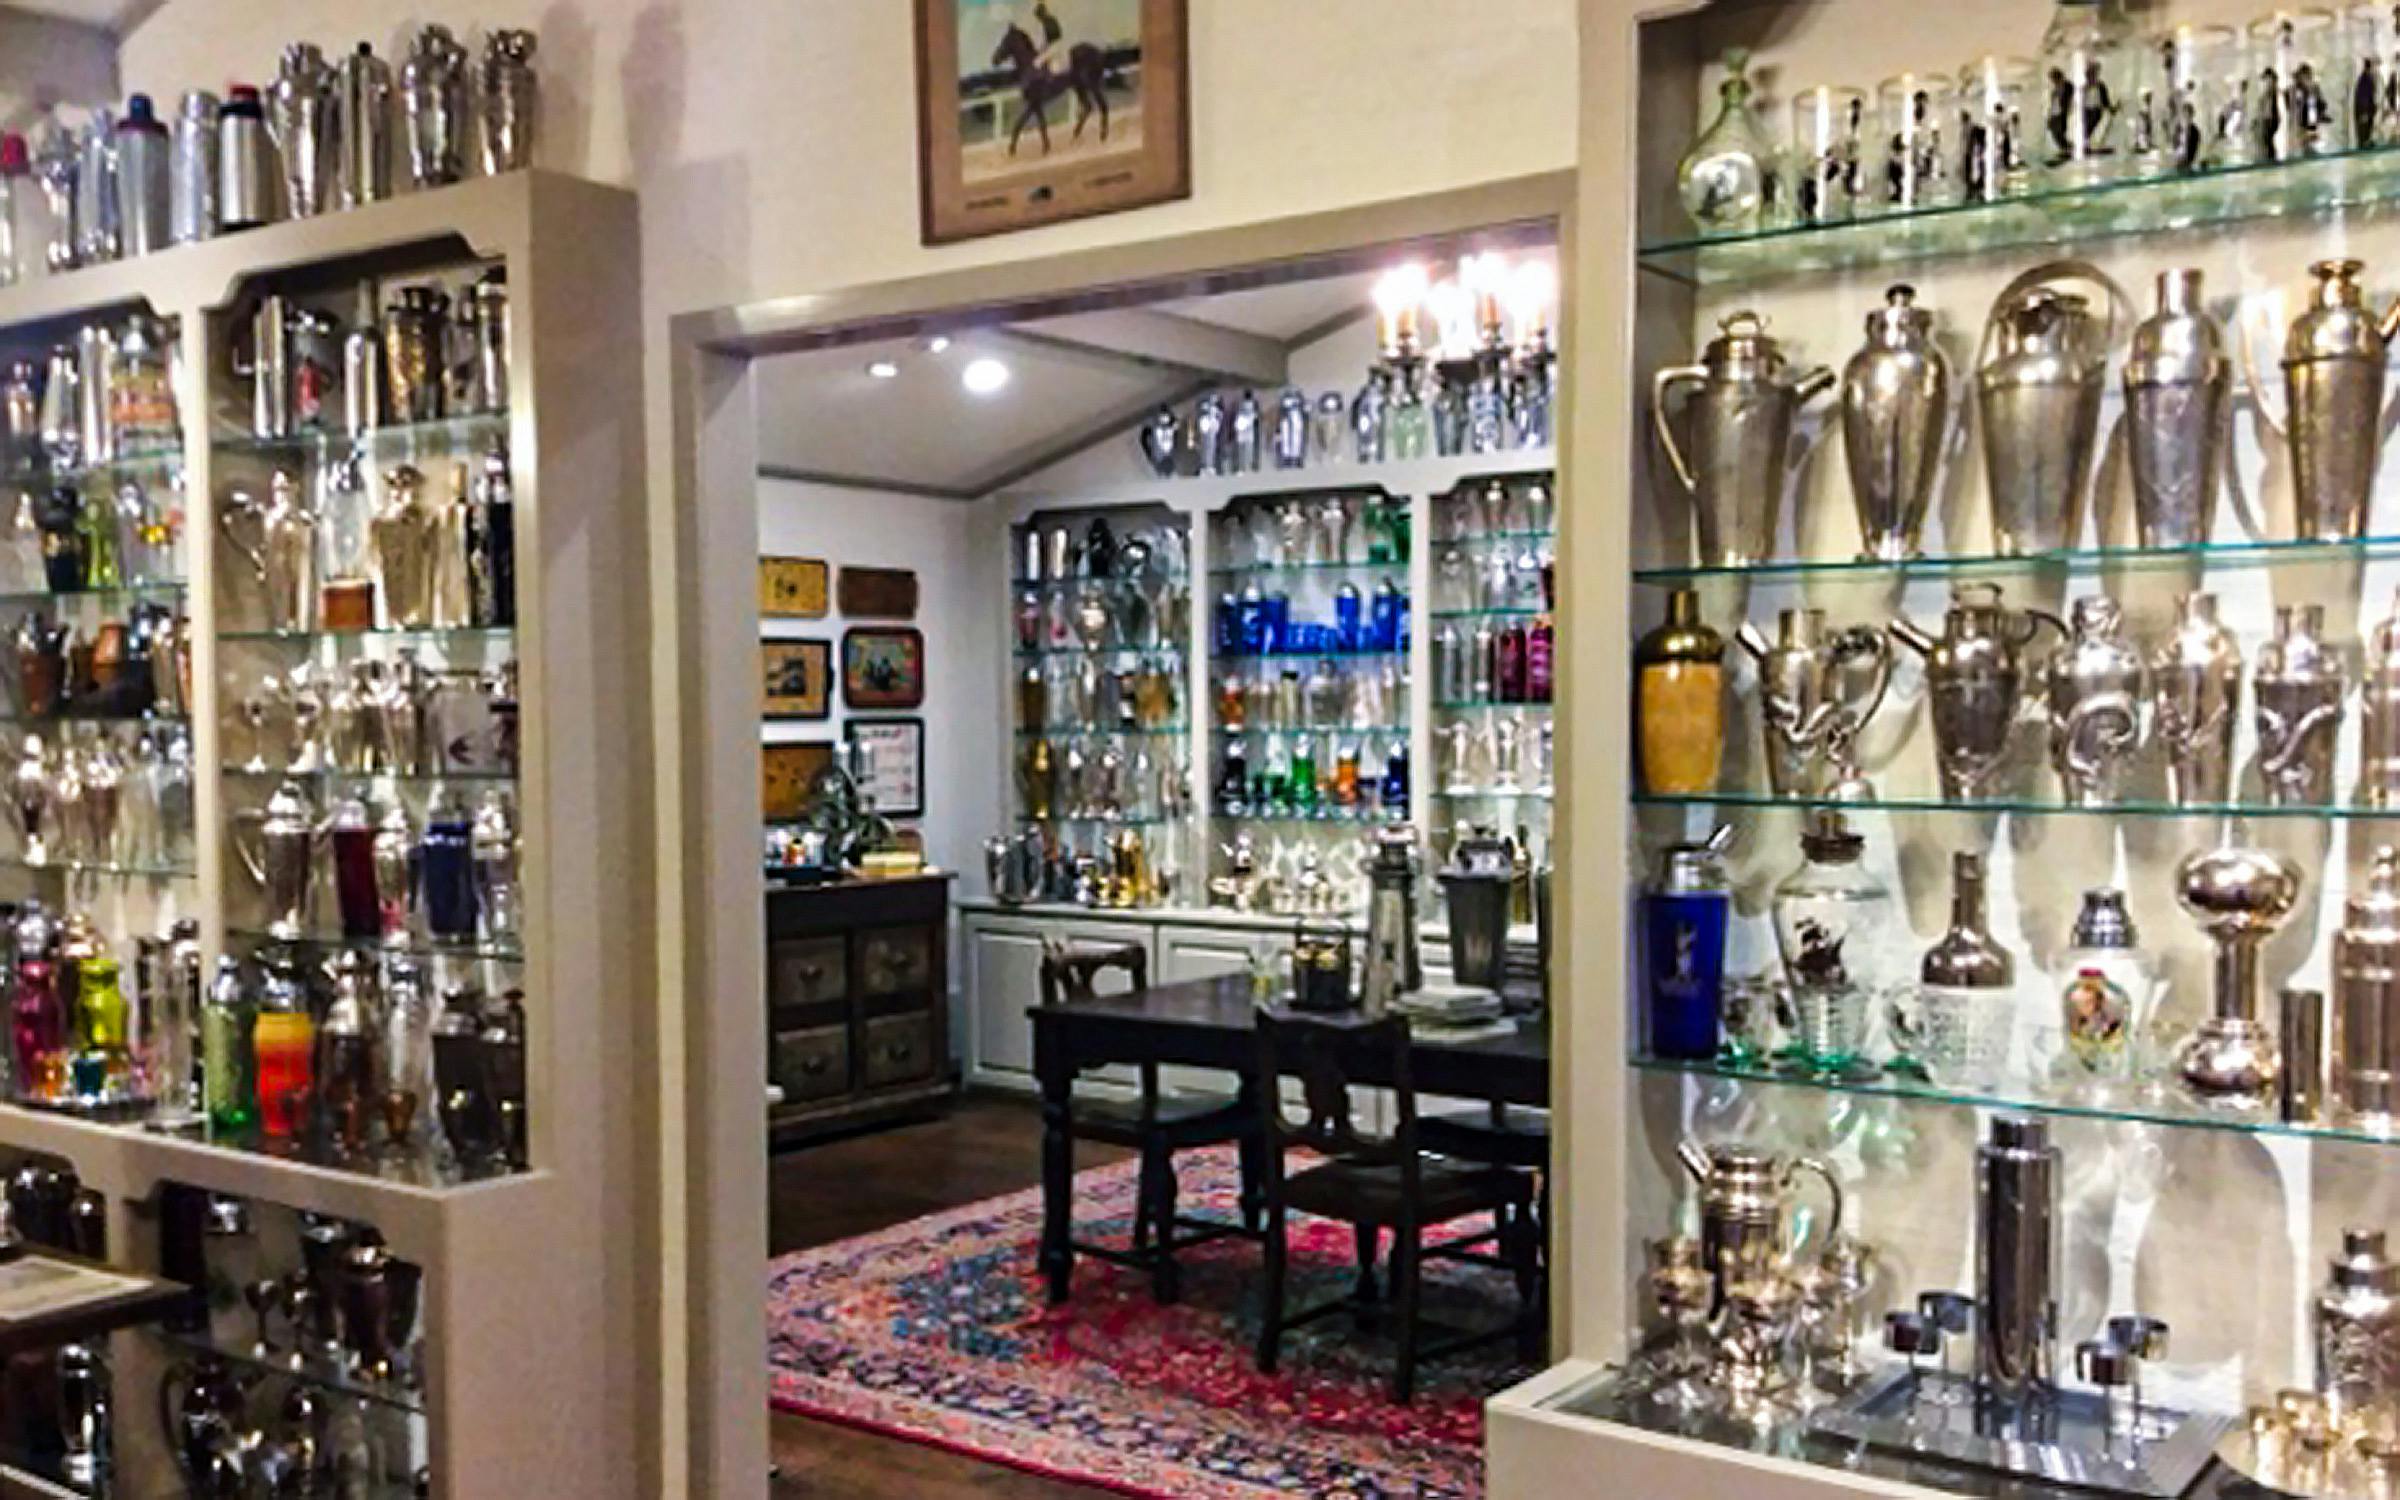 Walter Erwin has collected 1,500 cocktail shakers that live in a custom add-on to his home in Ennis.